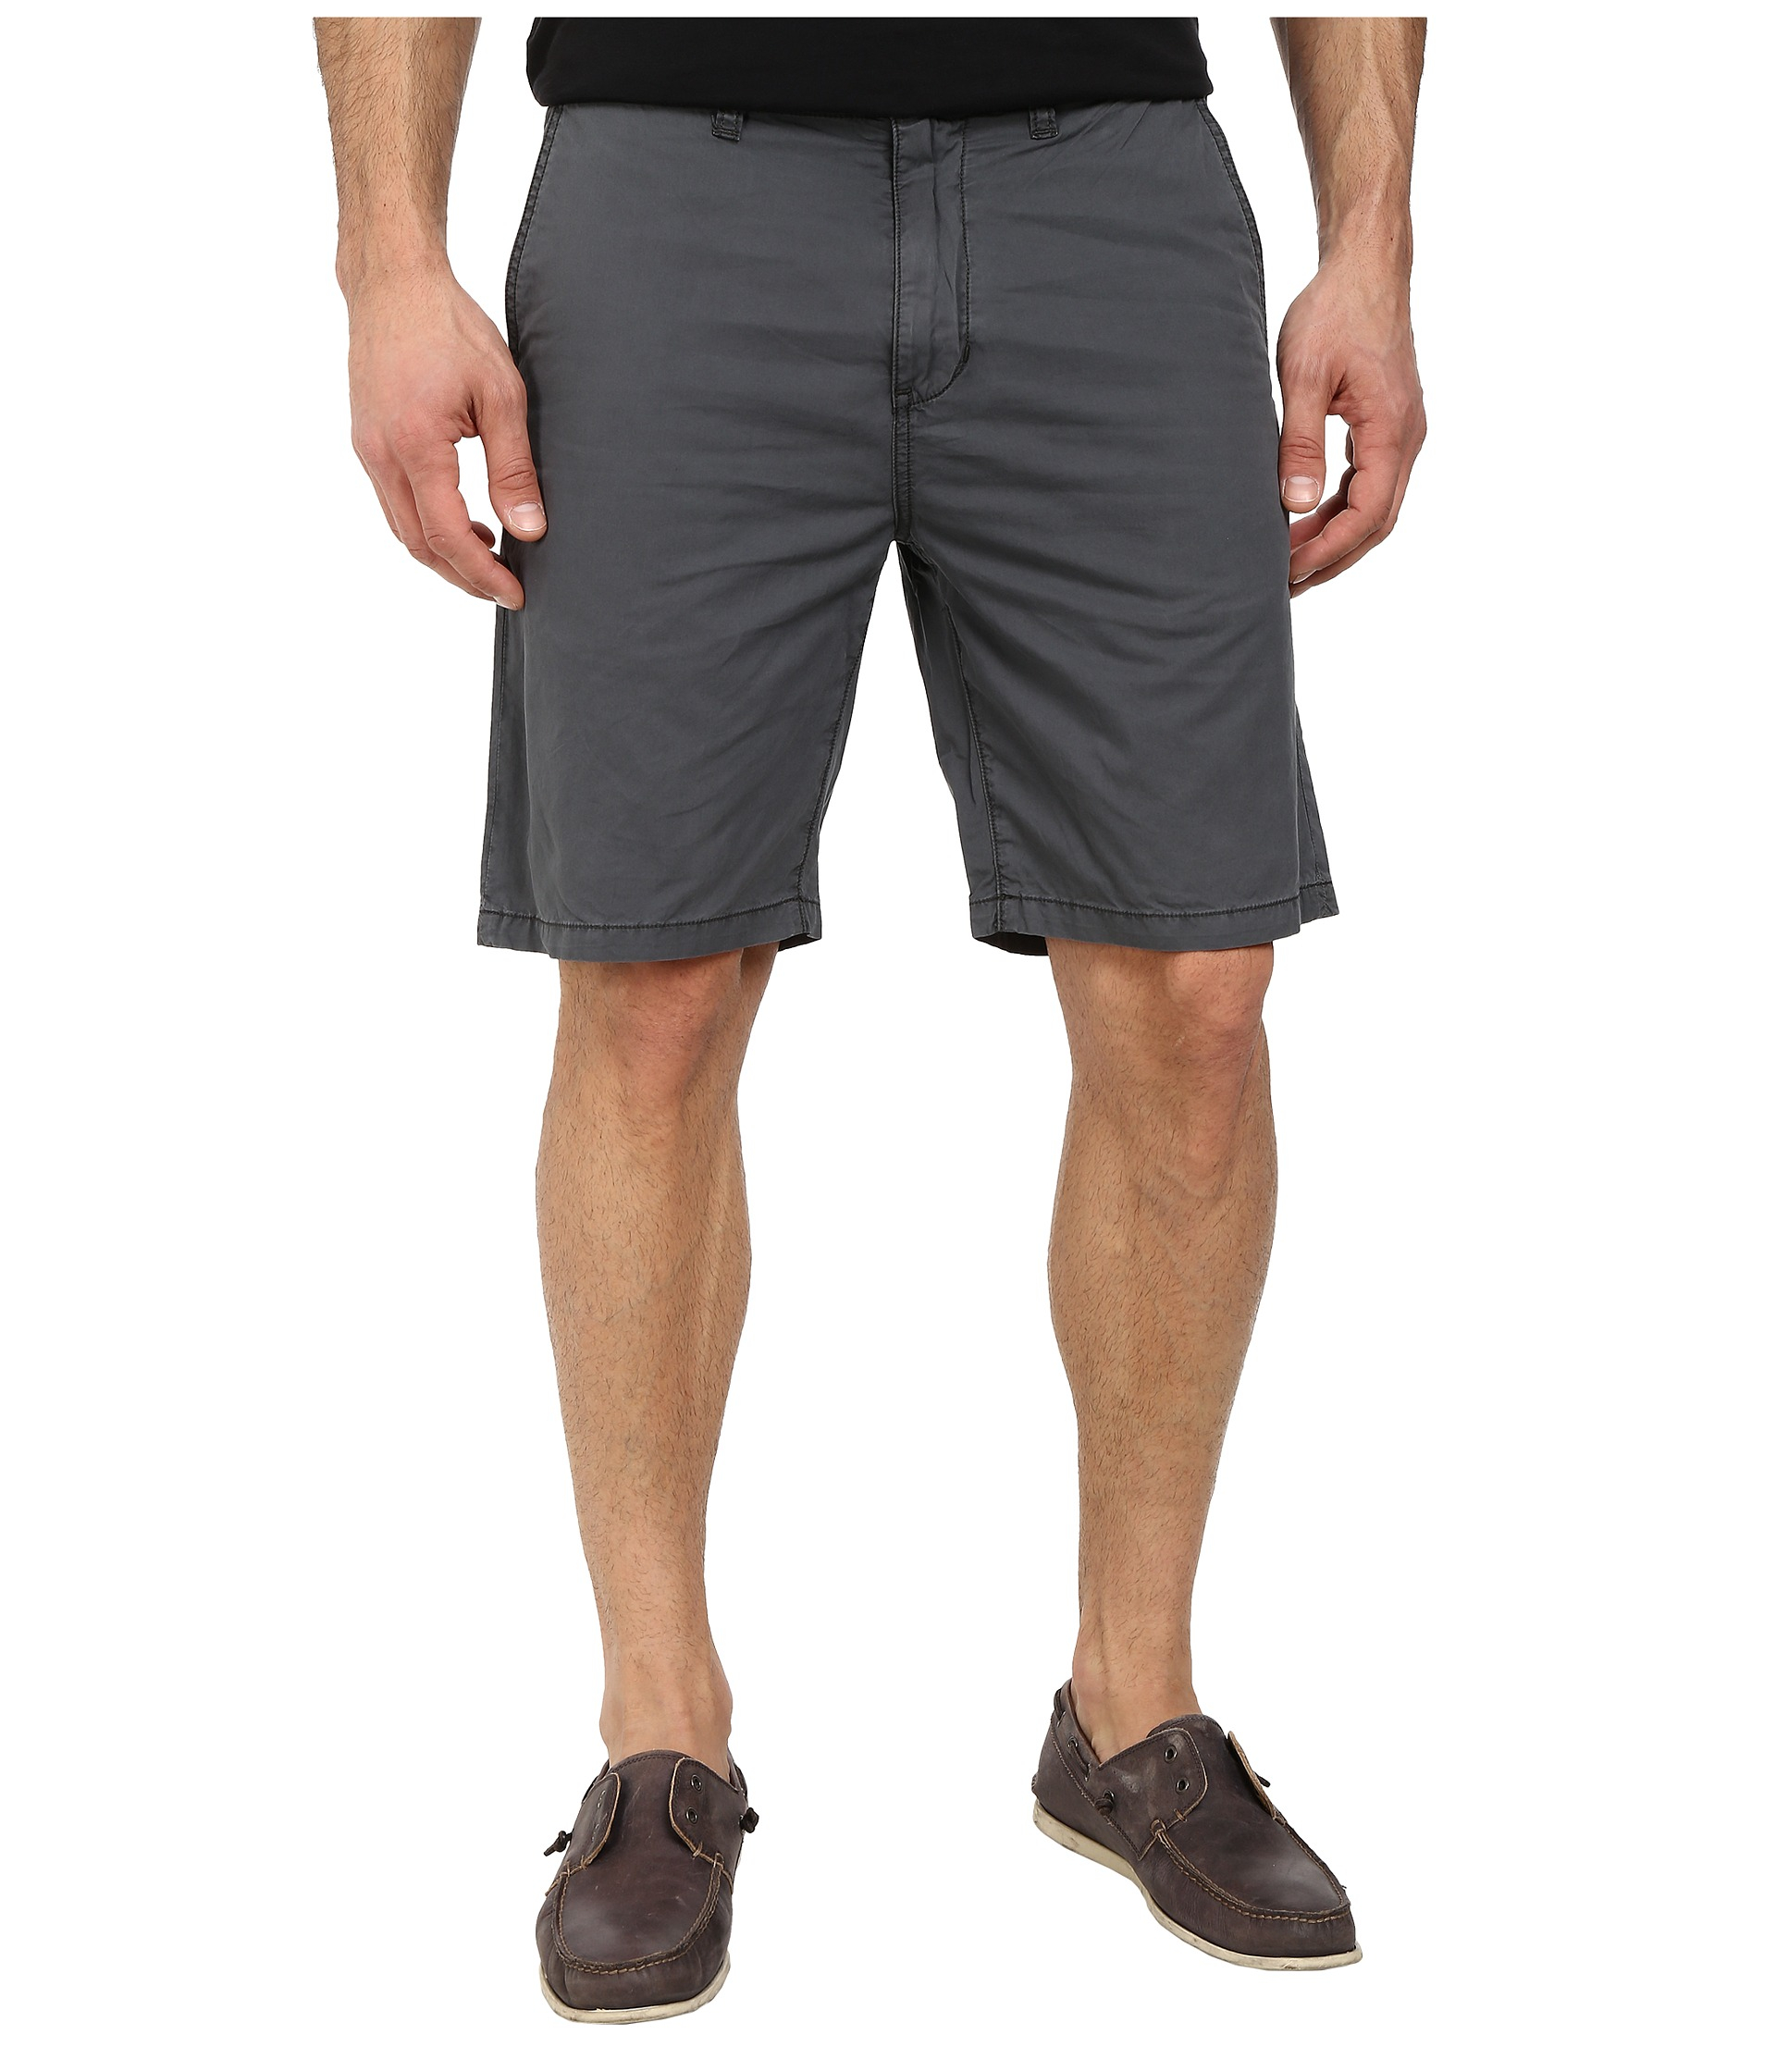 Lyst - John Varvatos Casual Short With Flap Back Pockets in Gray for Men